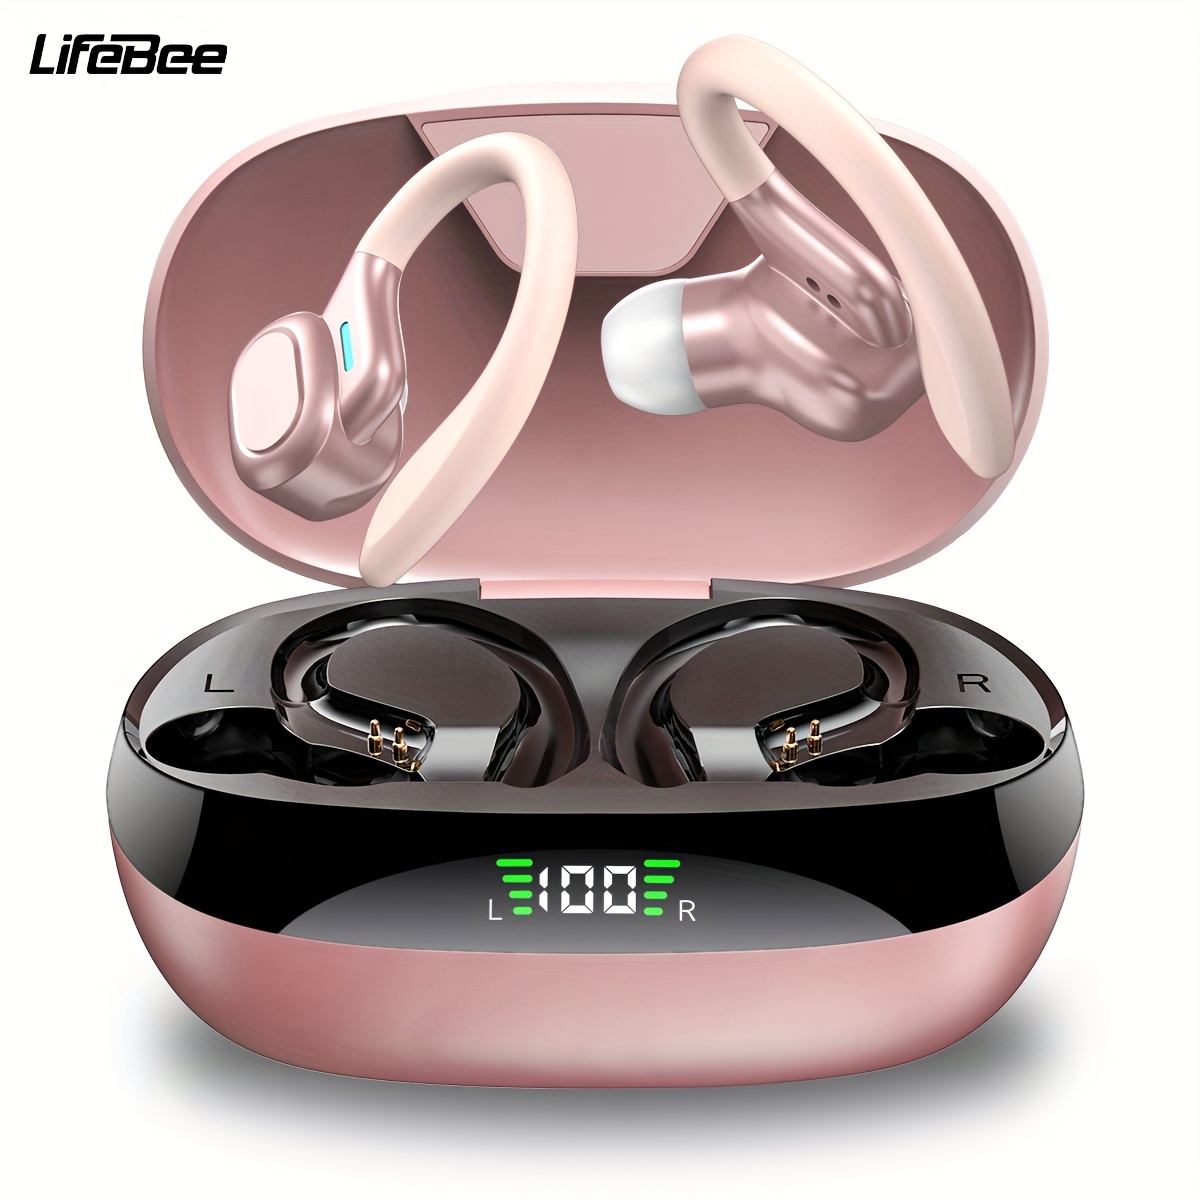 

Lifebee True Wireless Earbuds: Stereo Sound Quality, Enc Noise Cancelling Mic, Sport Earhook Headset, Led Display Charging Case, Wireless Compatible